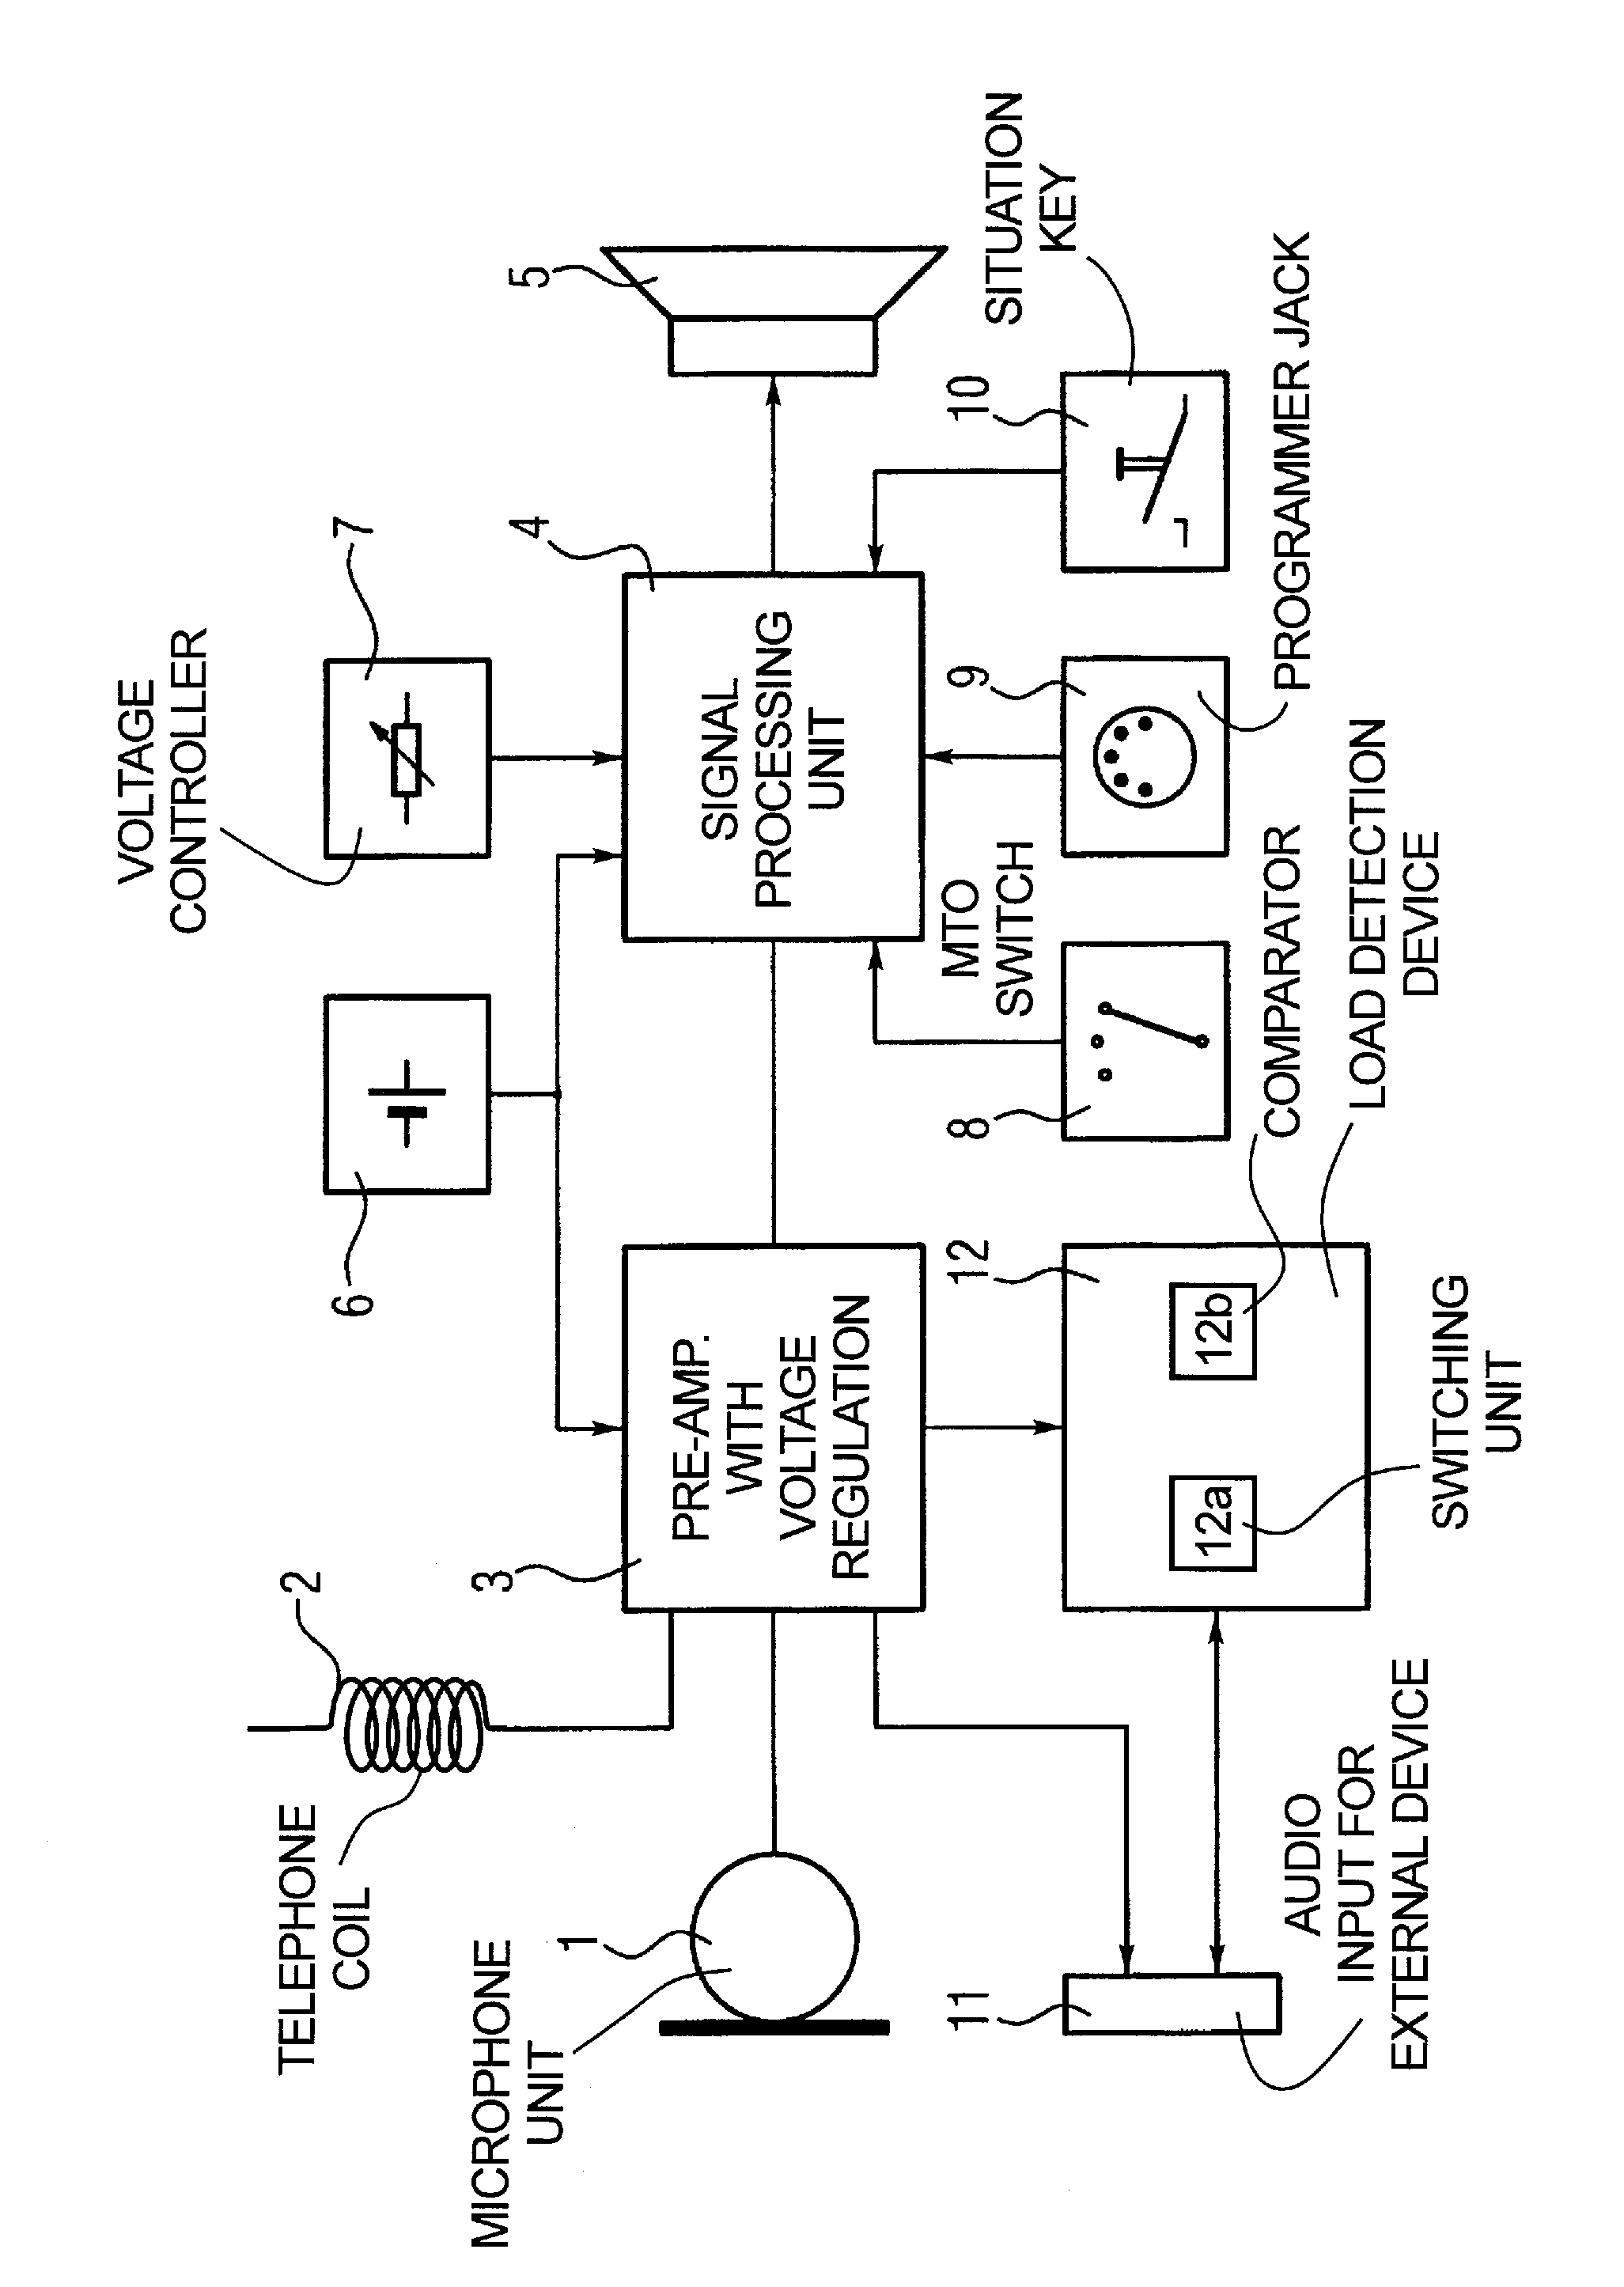 Hearing aid device and operating method for automatically switching voltage supply to a connected external device